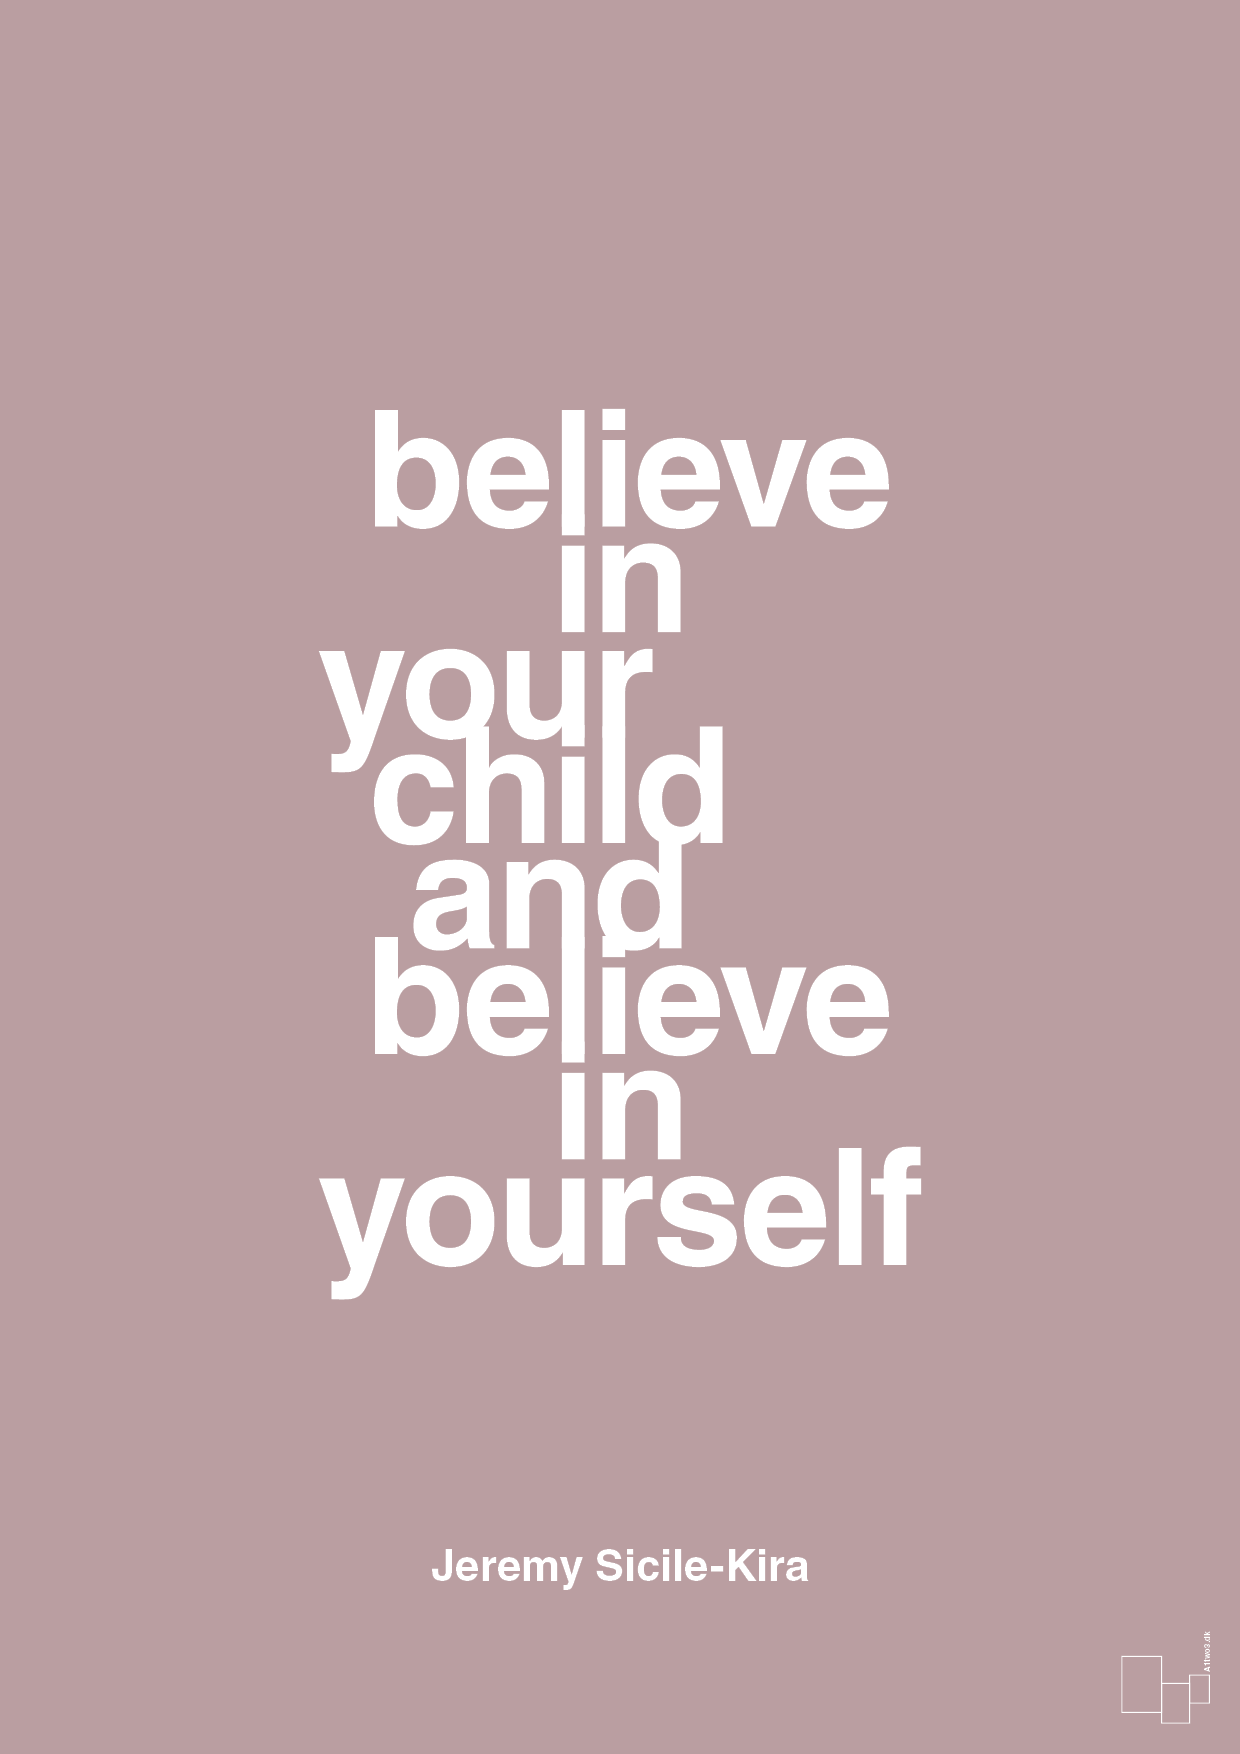 believe in your child and believe in yourself - Plakat med Samfund i Light Rose